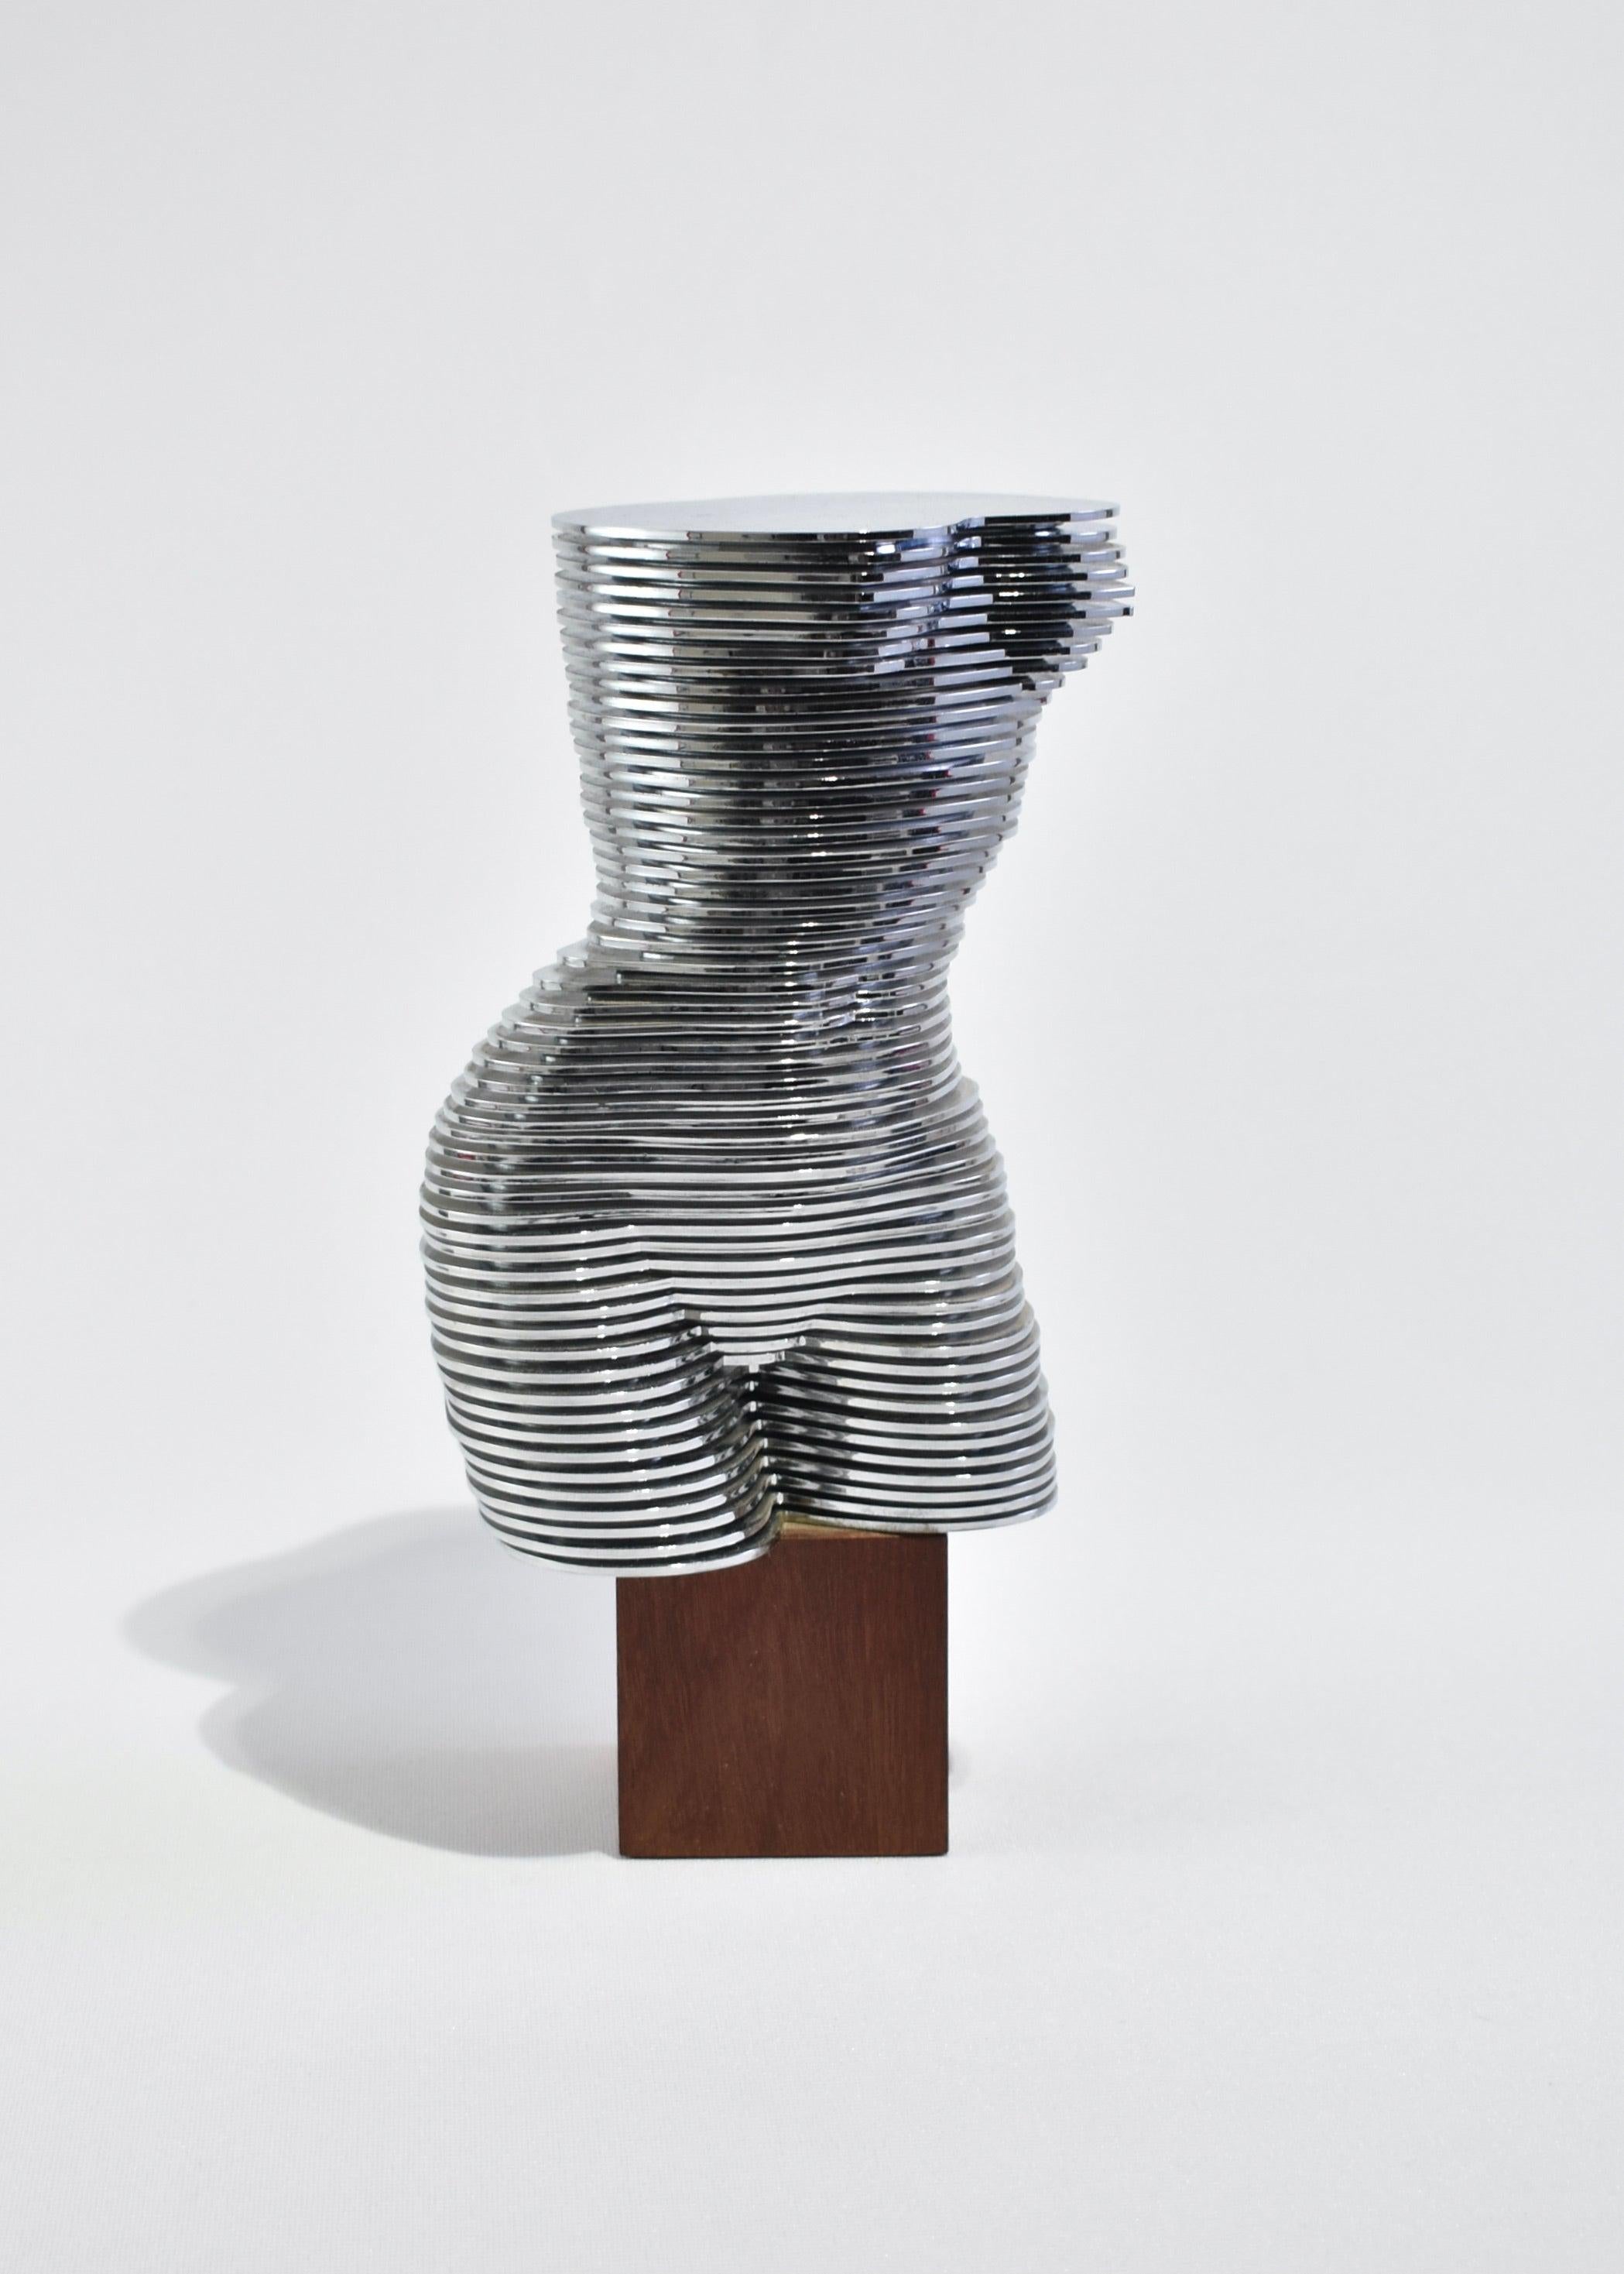 Rare, dynamic woman torso sculpture 'Eva' made of 55 different sized chromed plastic discs that spin on a central metal axis on wooden base. Each disc can be individually moved to form an abstract sculpture. Eva was produced for the 46th Venice